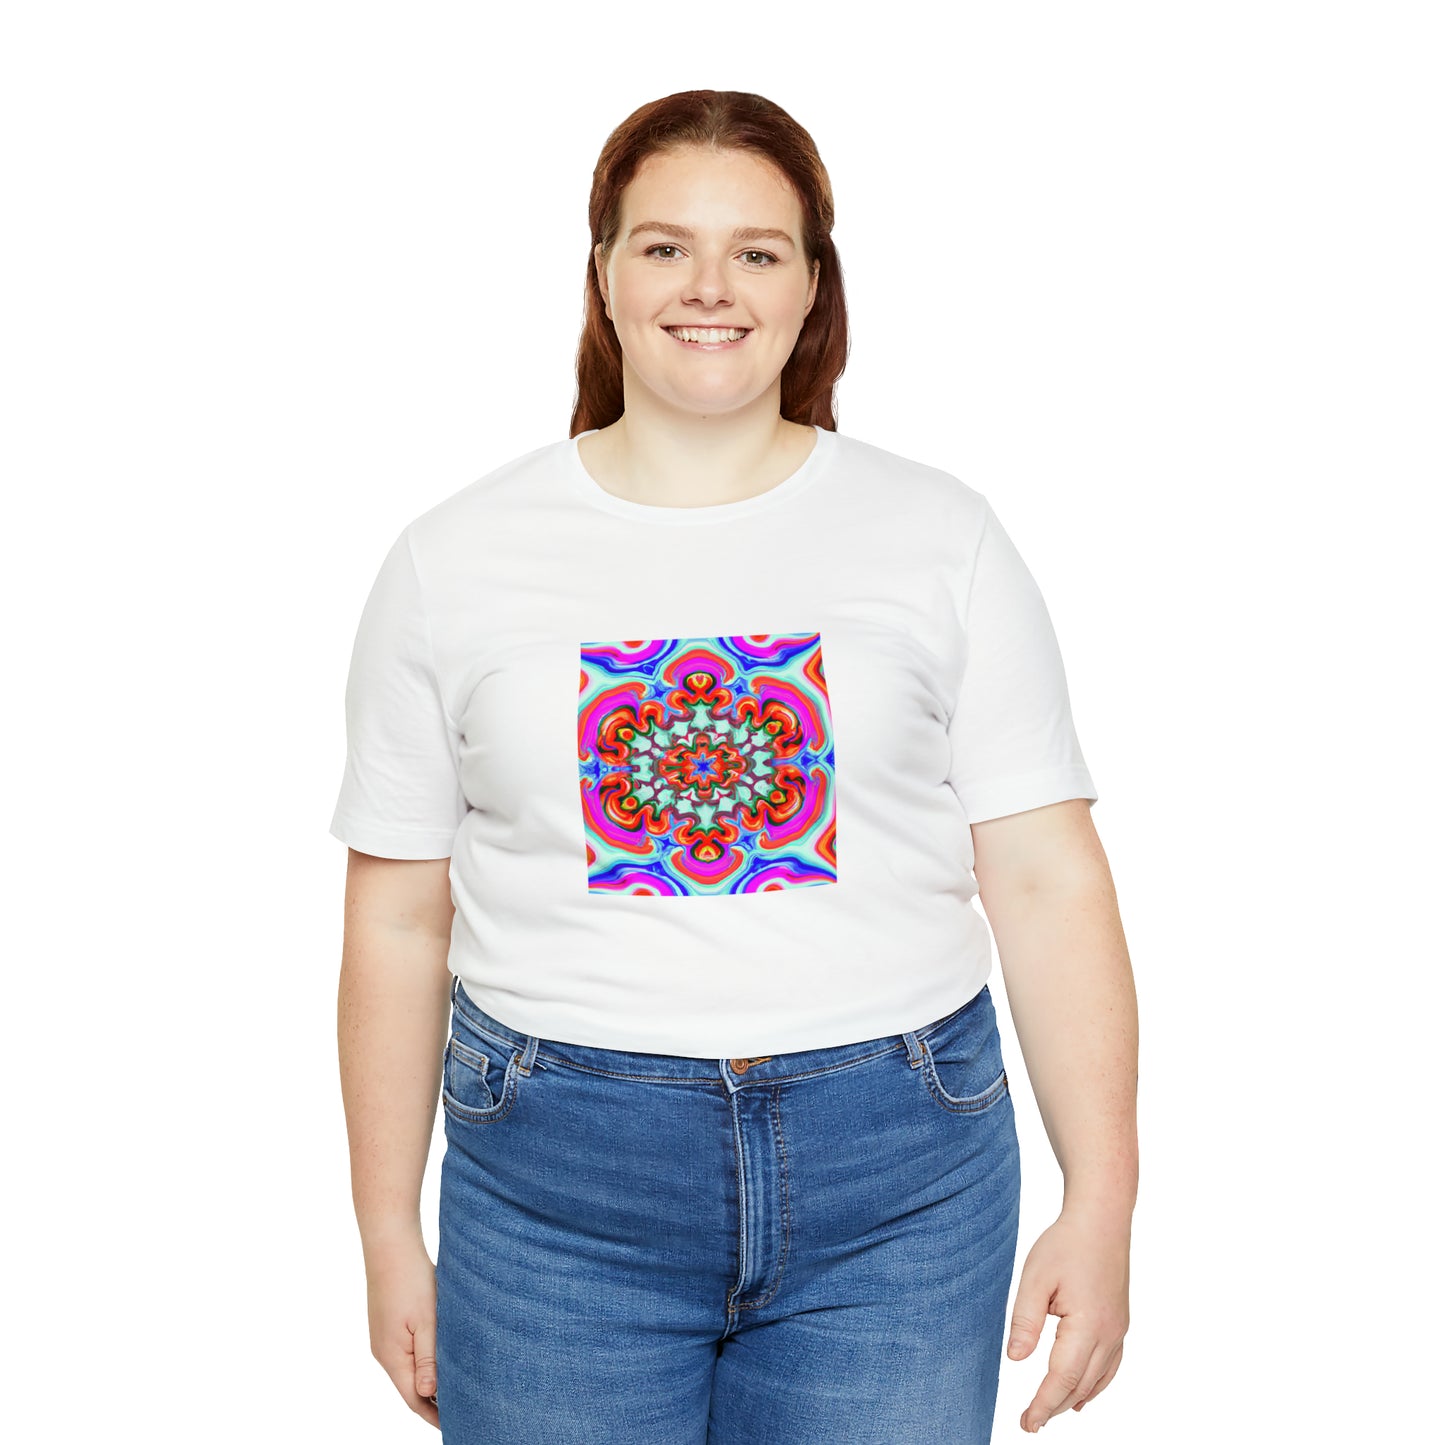 Winston Waugh - Psychedelic Trippy Pattern Tee Shirt